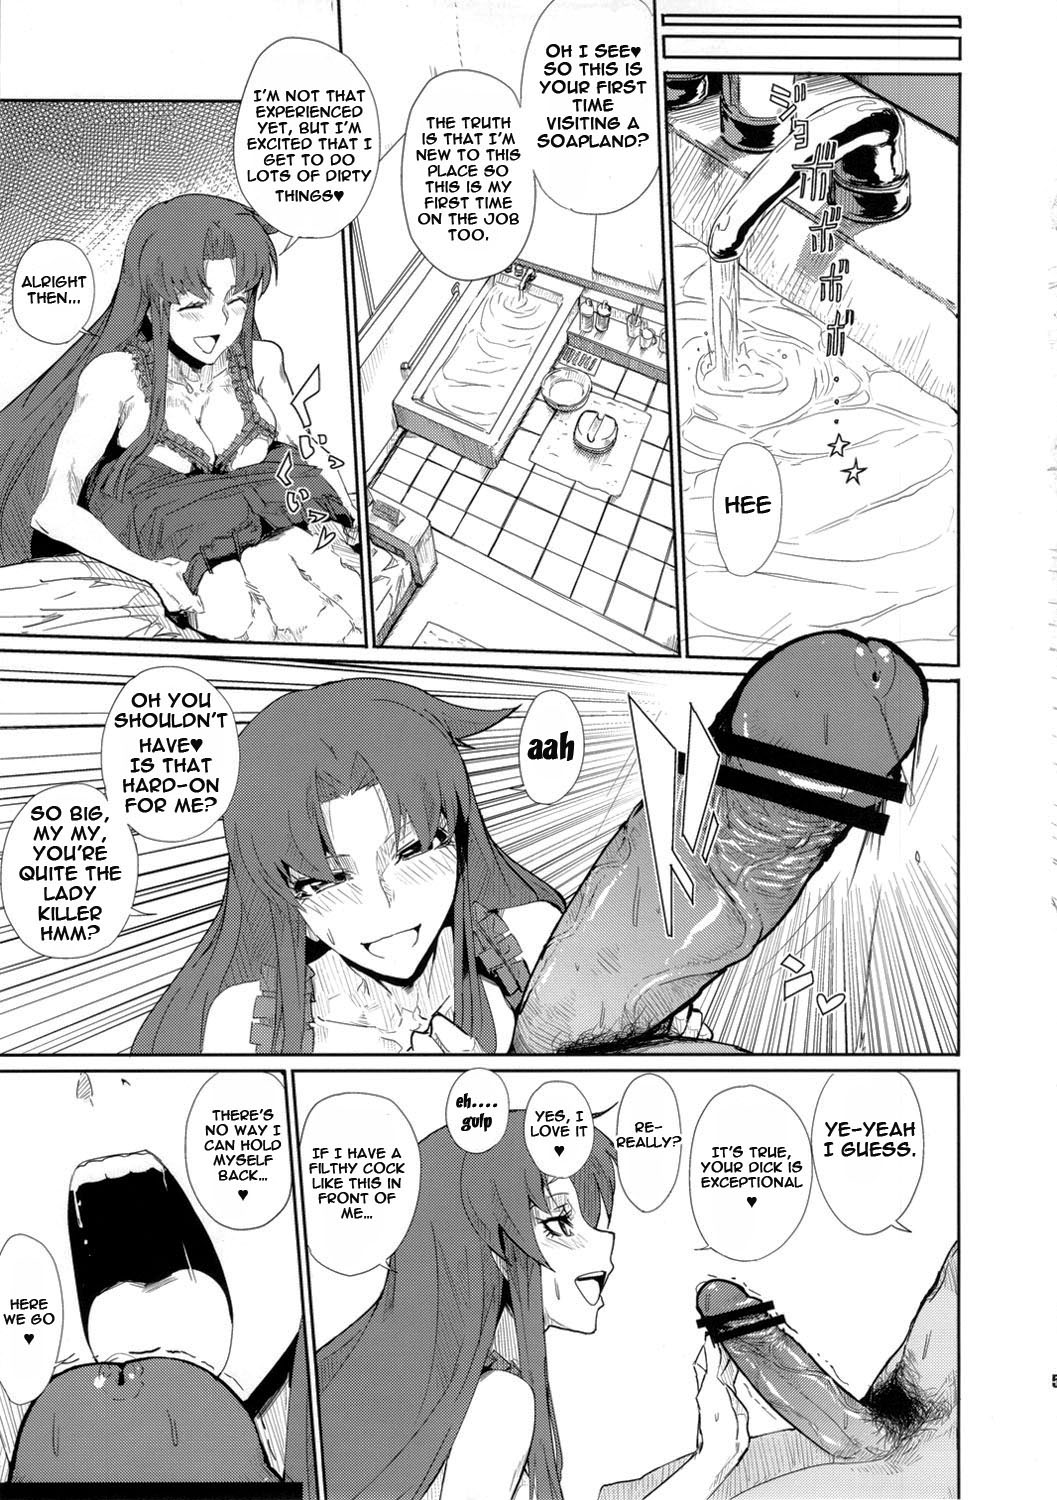 Erotic Journey as a Soapland Maiden COMIC